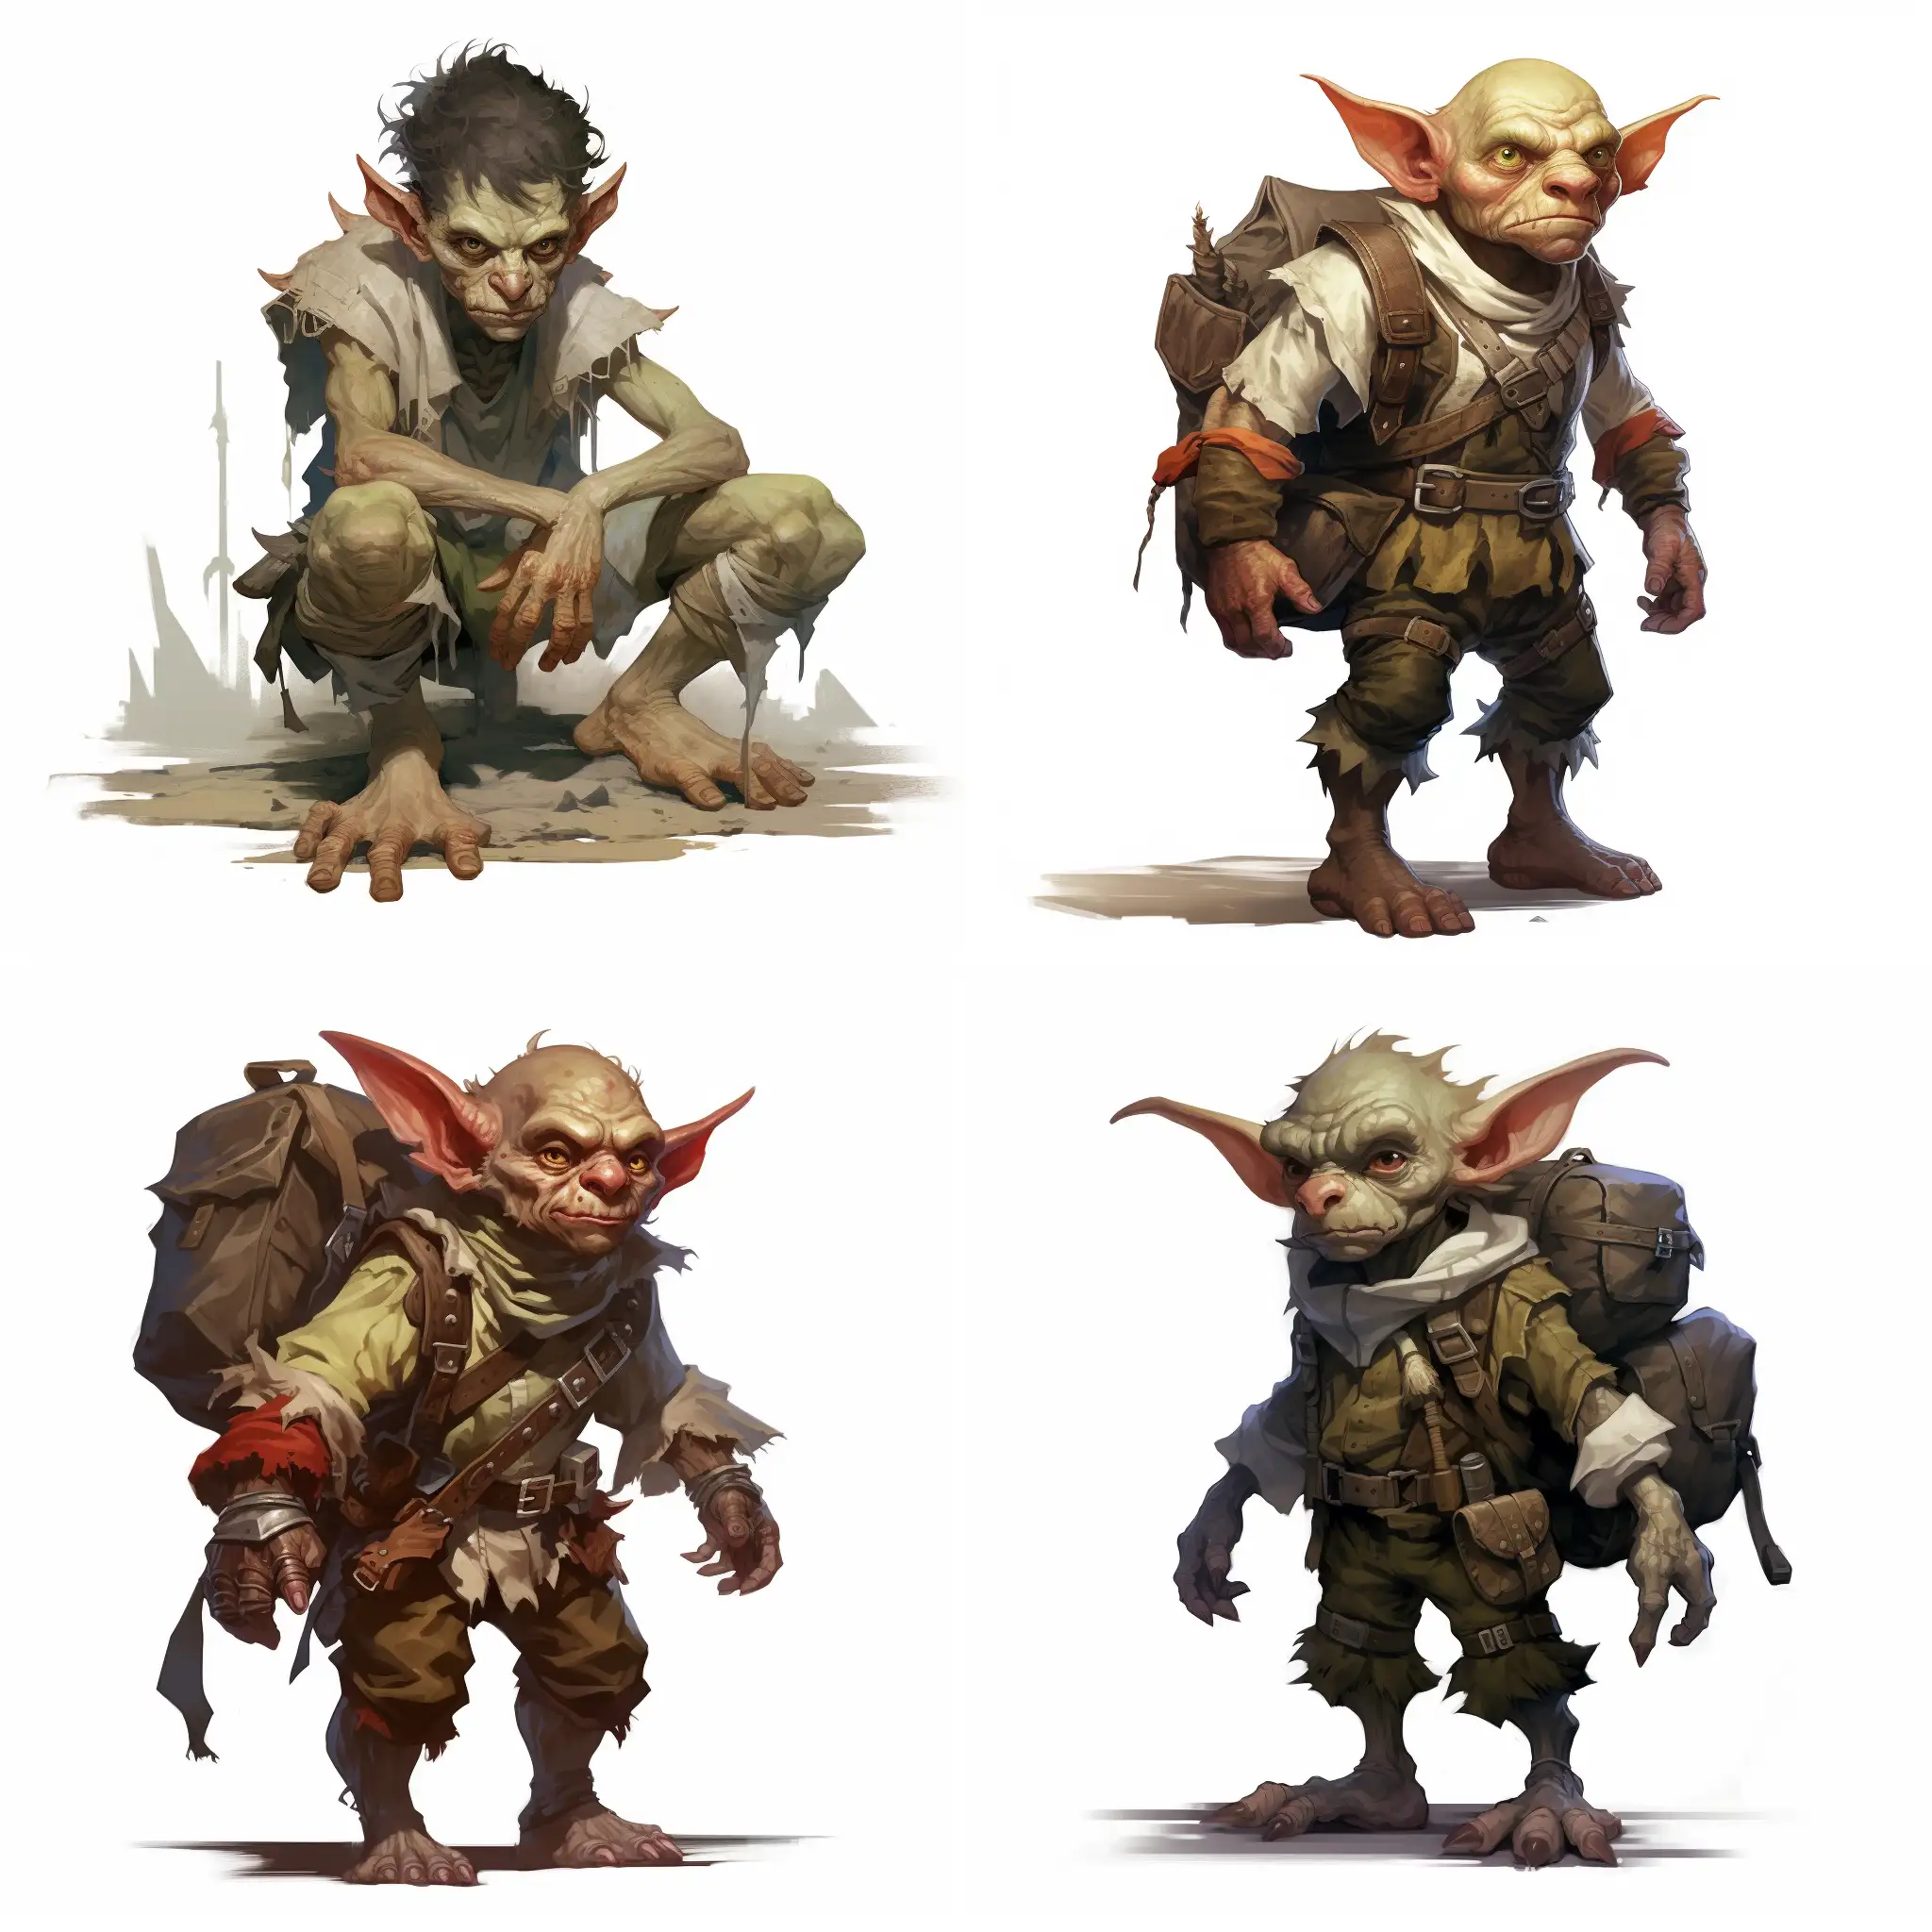 Goblin-Character-in-Fantasy-Setting-Dungeons-and-Dragons-Art